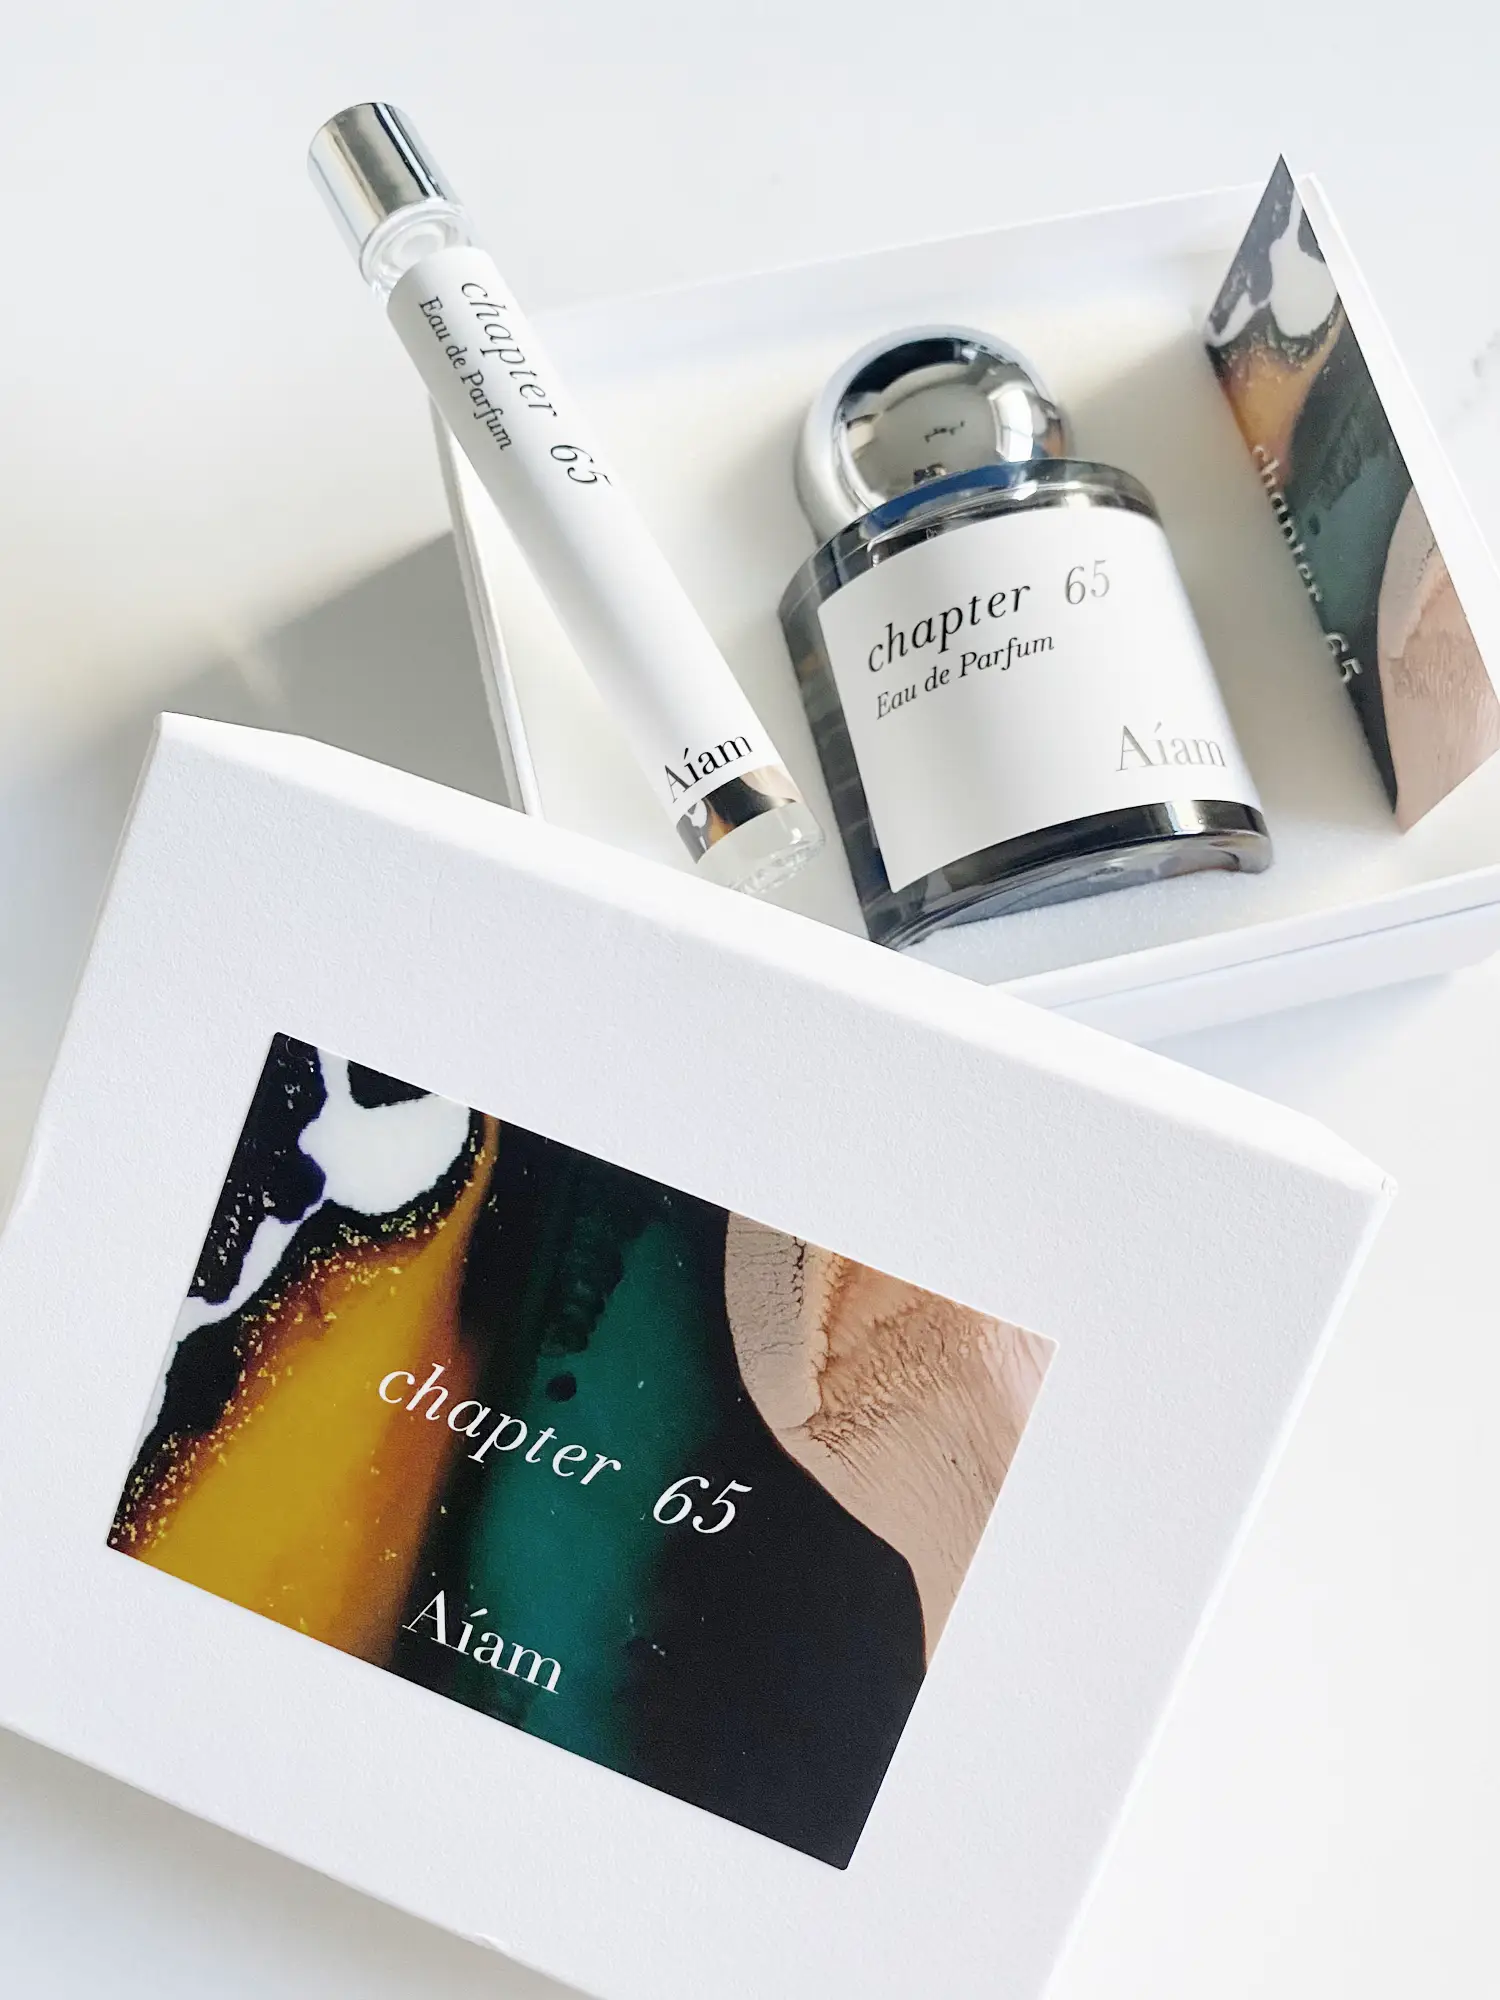 Rumored Mote Perfume    Aiam | Gallery posted by   Kちゃん   | Lemon8